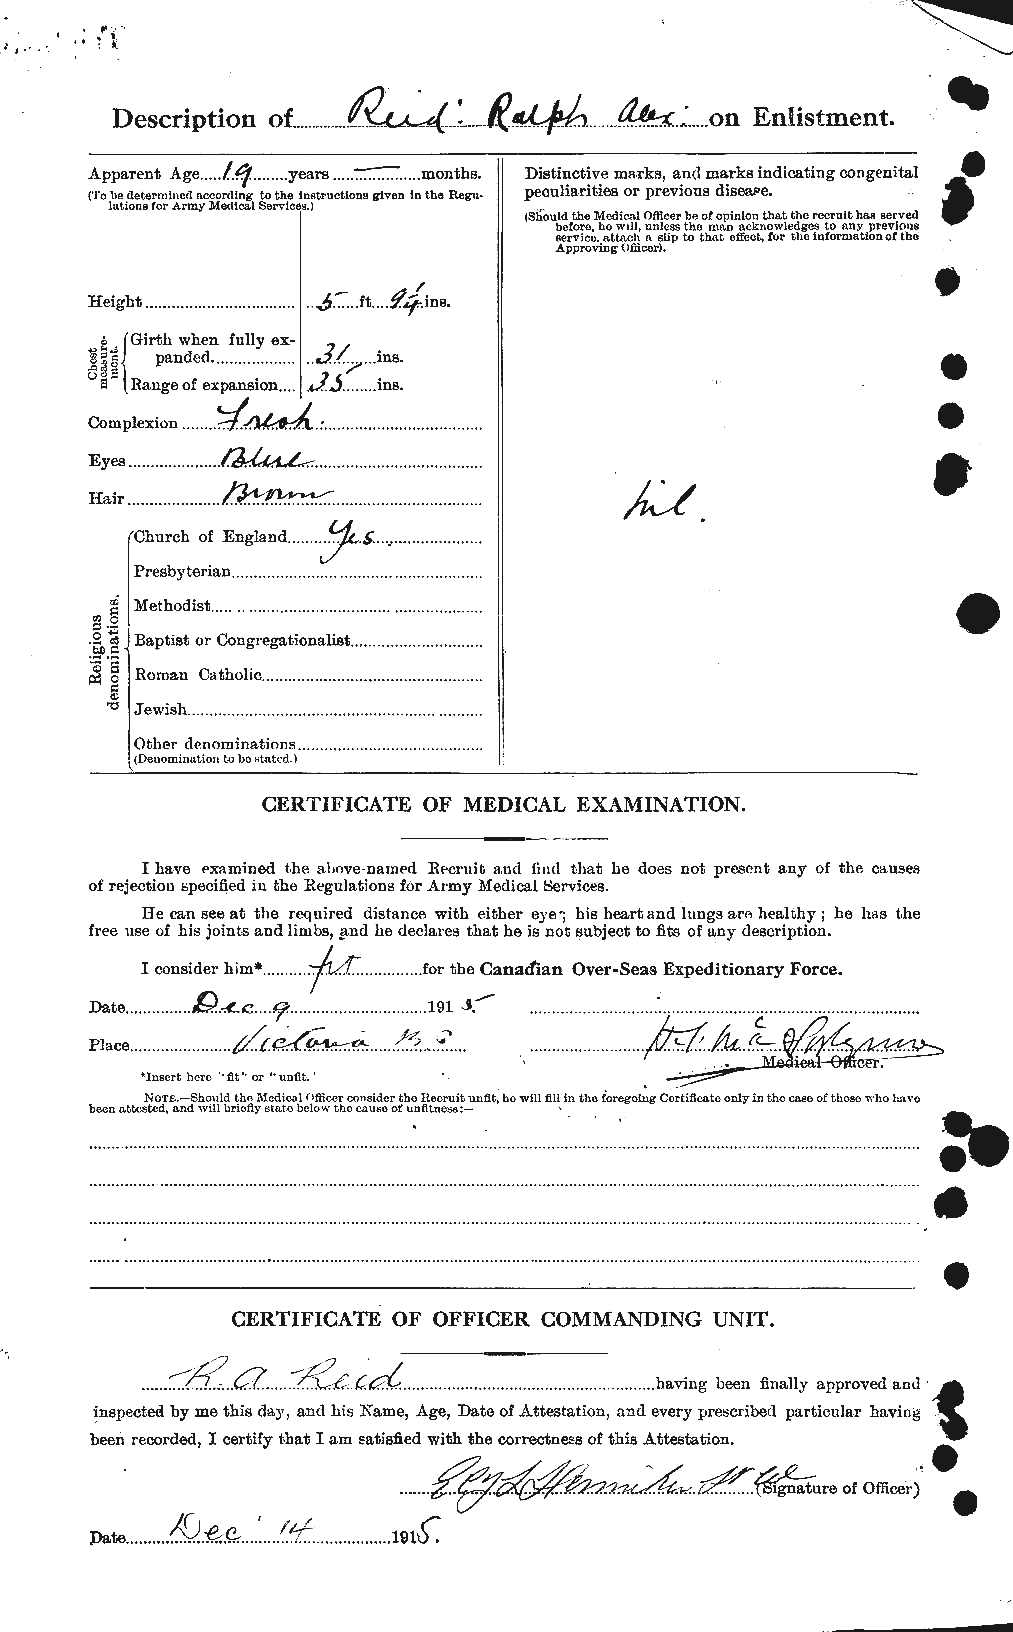 Personnel Records of the First World War - CEF 601848b